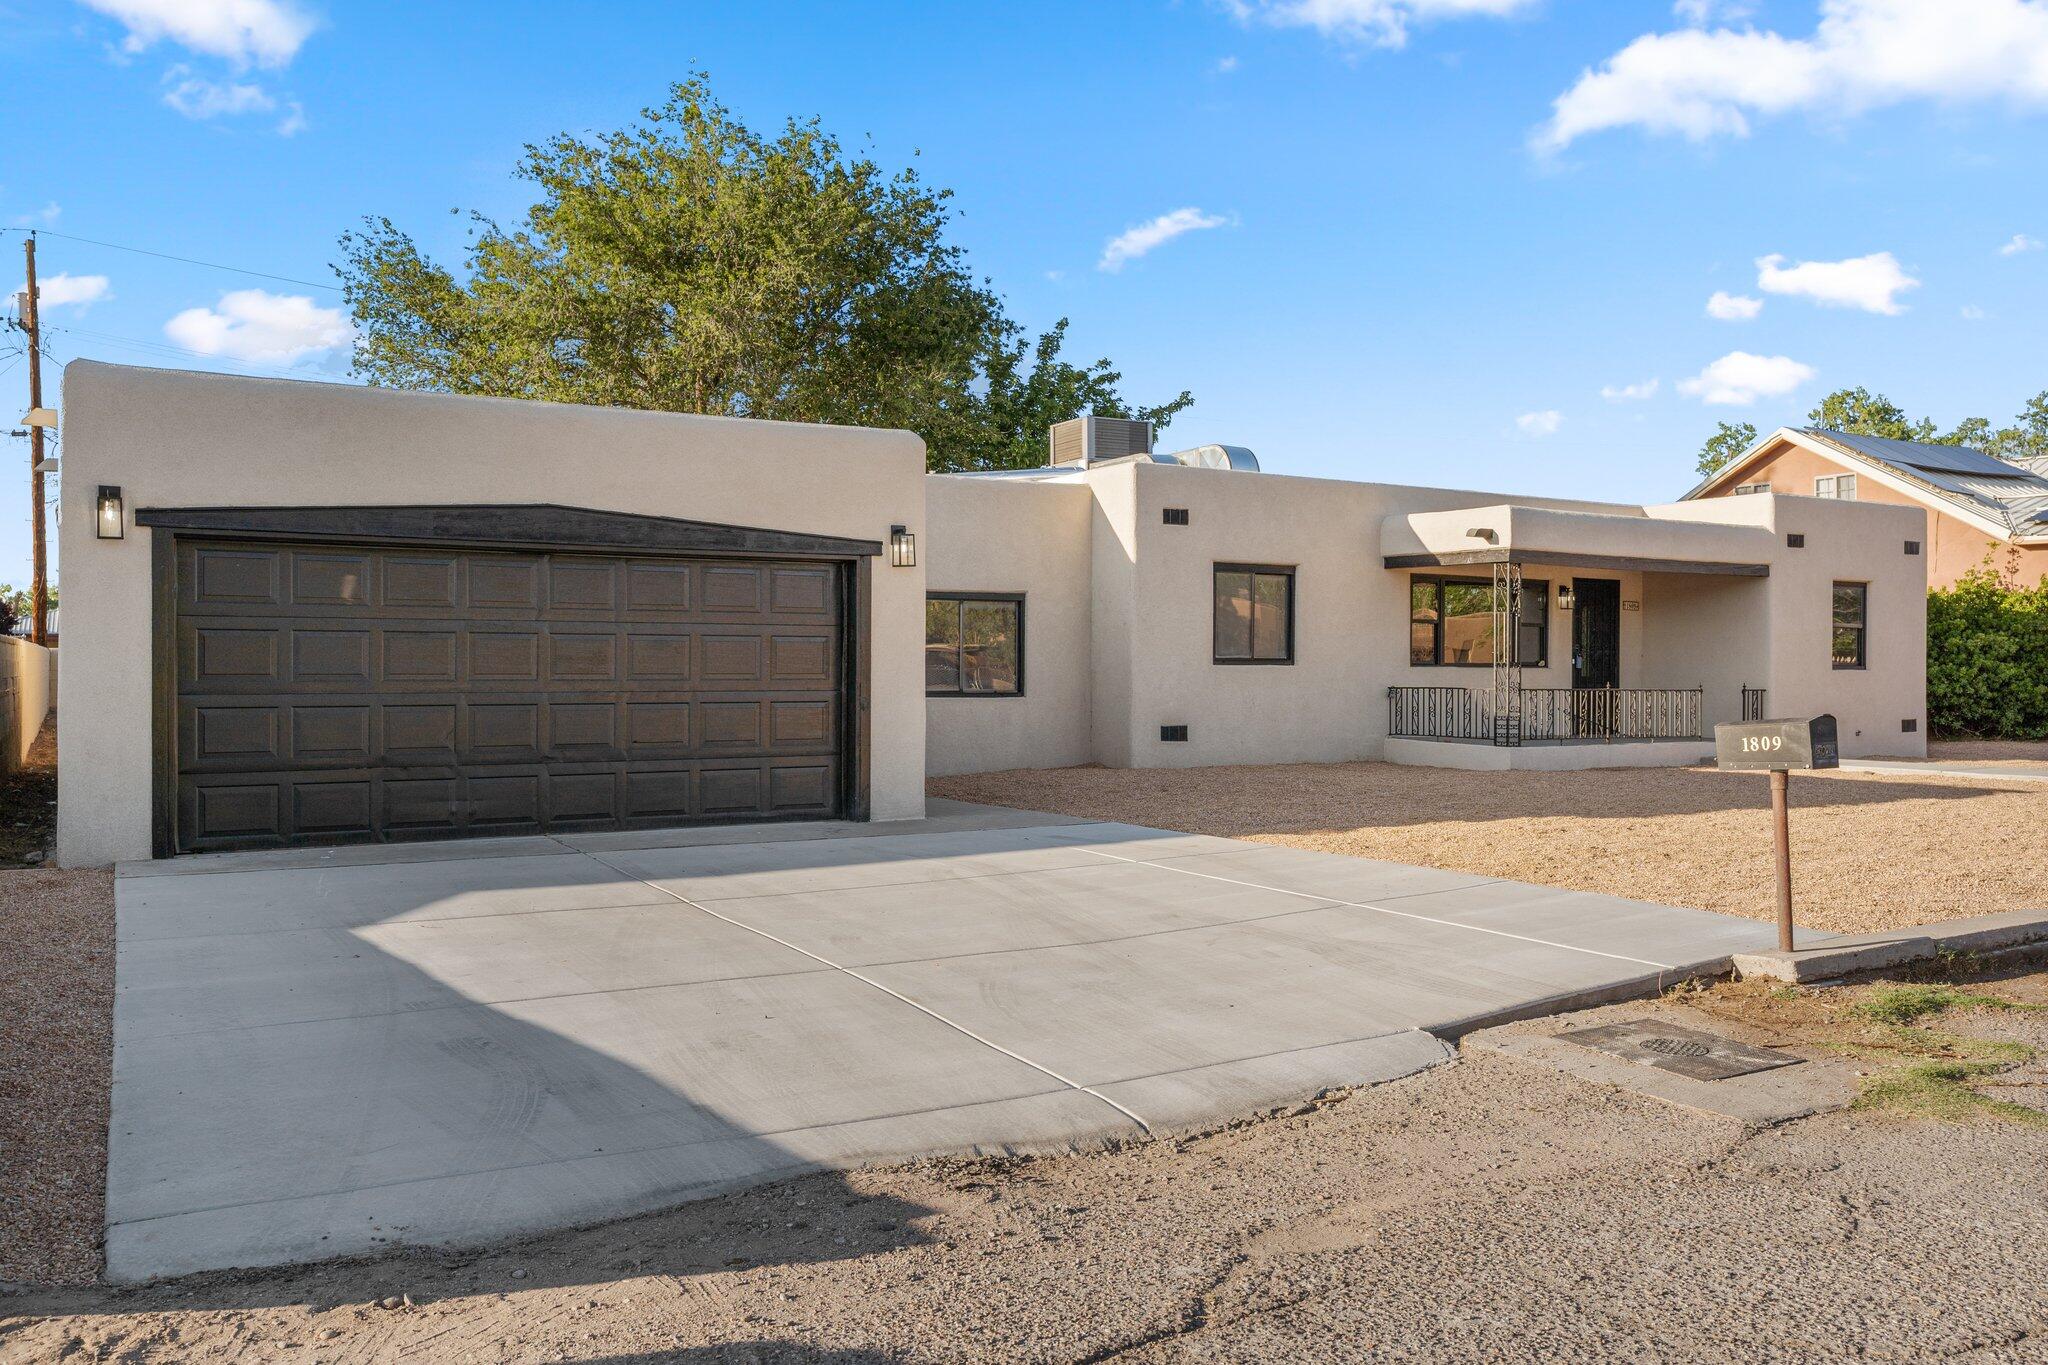 Discover the ultimate in luxury living in Albuquerque's South Valley! This stunning 4bd/2 bath/2 car garage custom home on 1/3 acre is a dream. Upgrades galore - kitchen, baths, flooring, paint, refrigerated air, stucco, water heaters, TPO roof, new appliances, fixtures, driveway, xeriscaping, and more: climate-controlled primary suite, three spacious living areas, indoor fireplaces, outdoor entertainment with fireplace. THERE IS no HOA outside of ABQ city limits, and convenient location, and a low-maintenance front yard. Experience South Valley's charm!